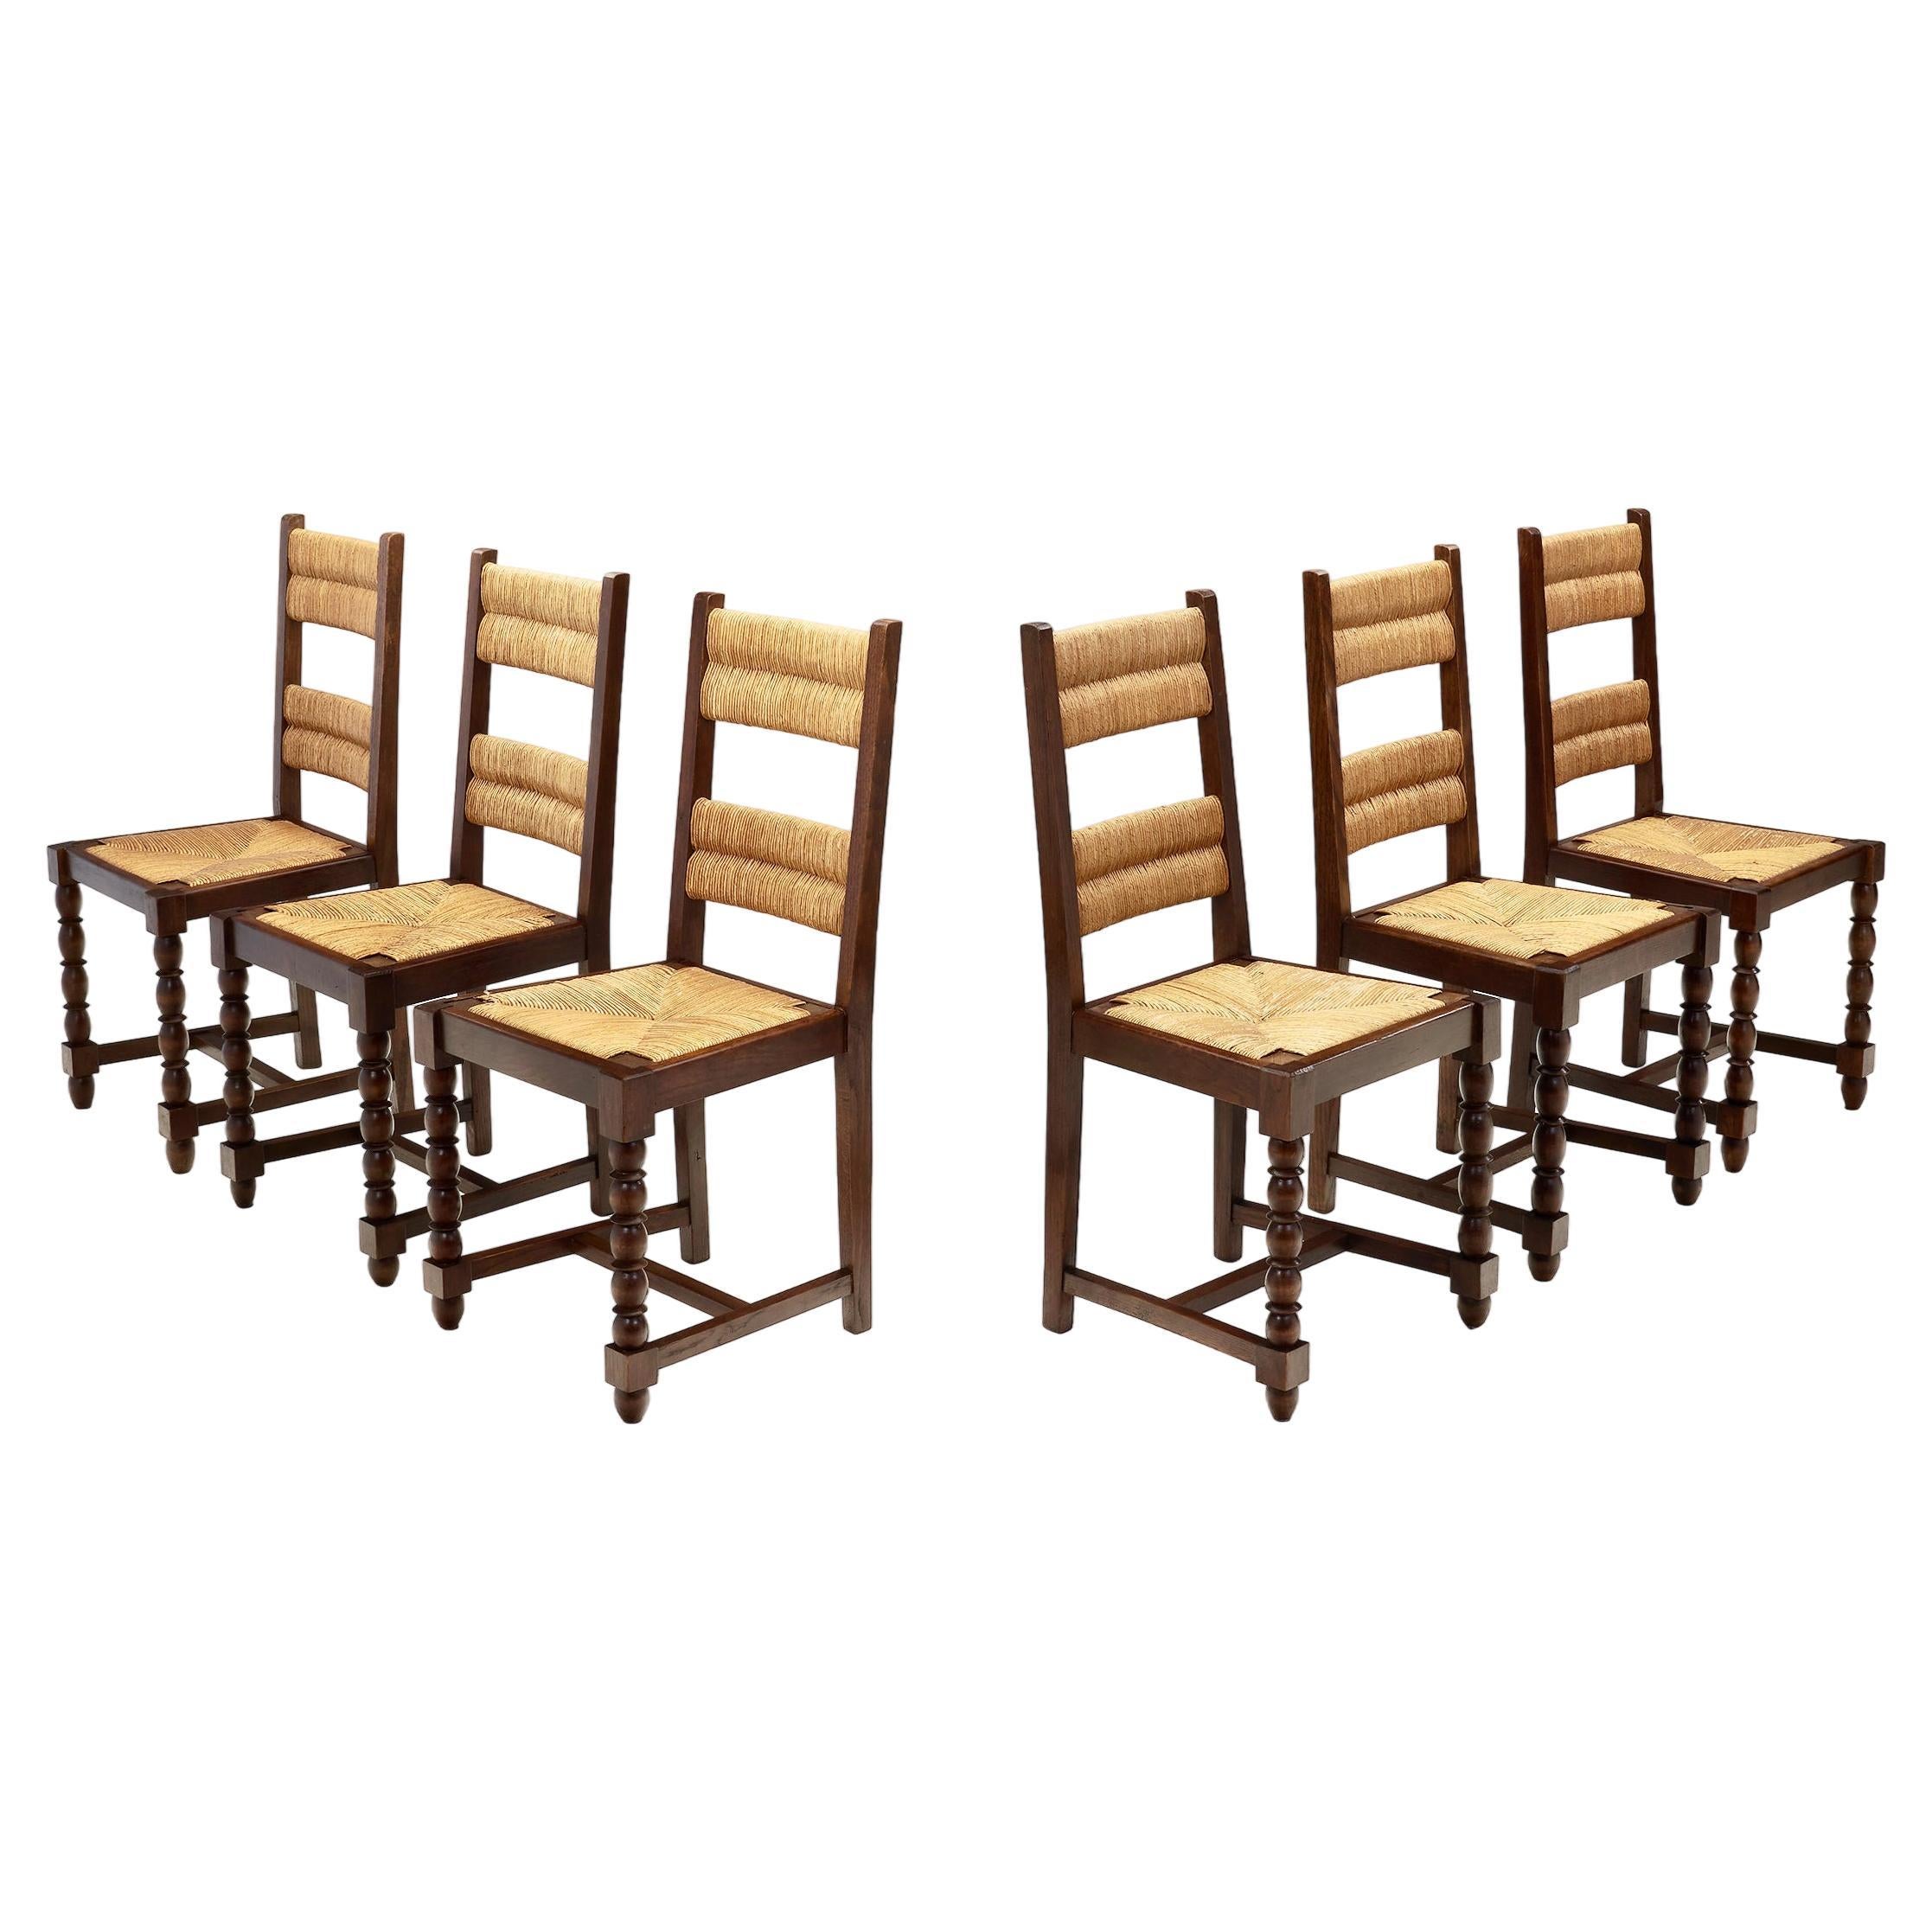 A Set of Six Cane and Wood Chairs with Sculptural Legs, Europe ca 1940s For Sale